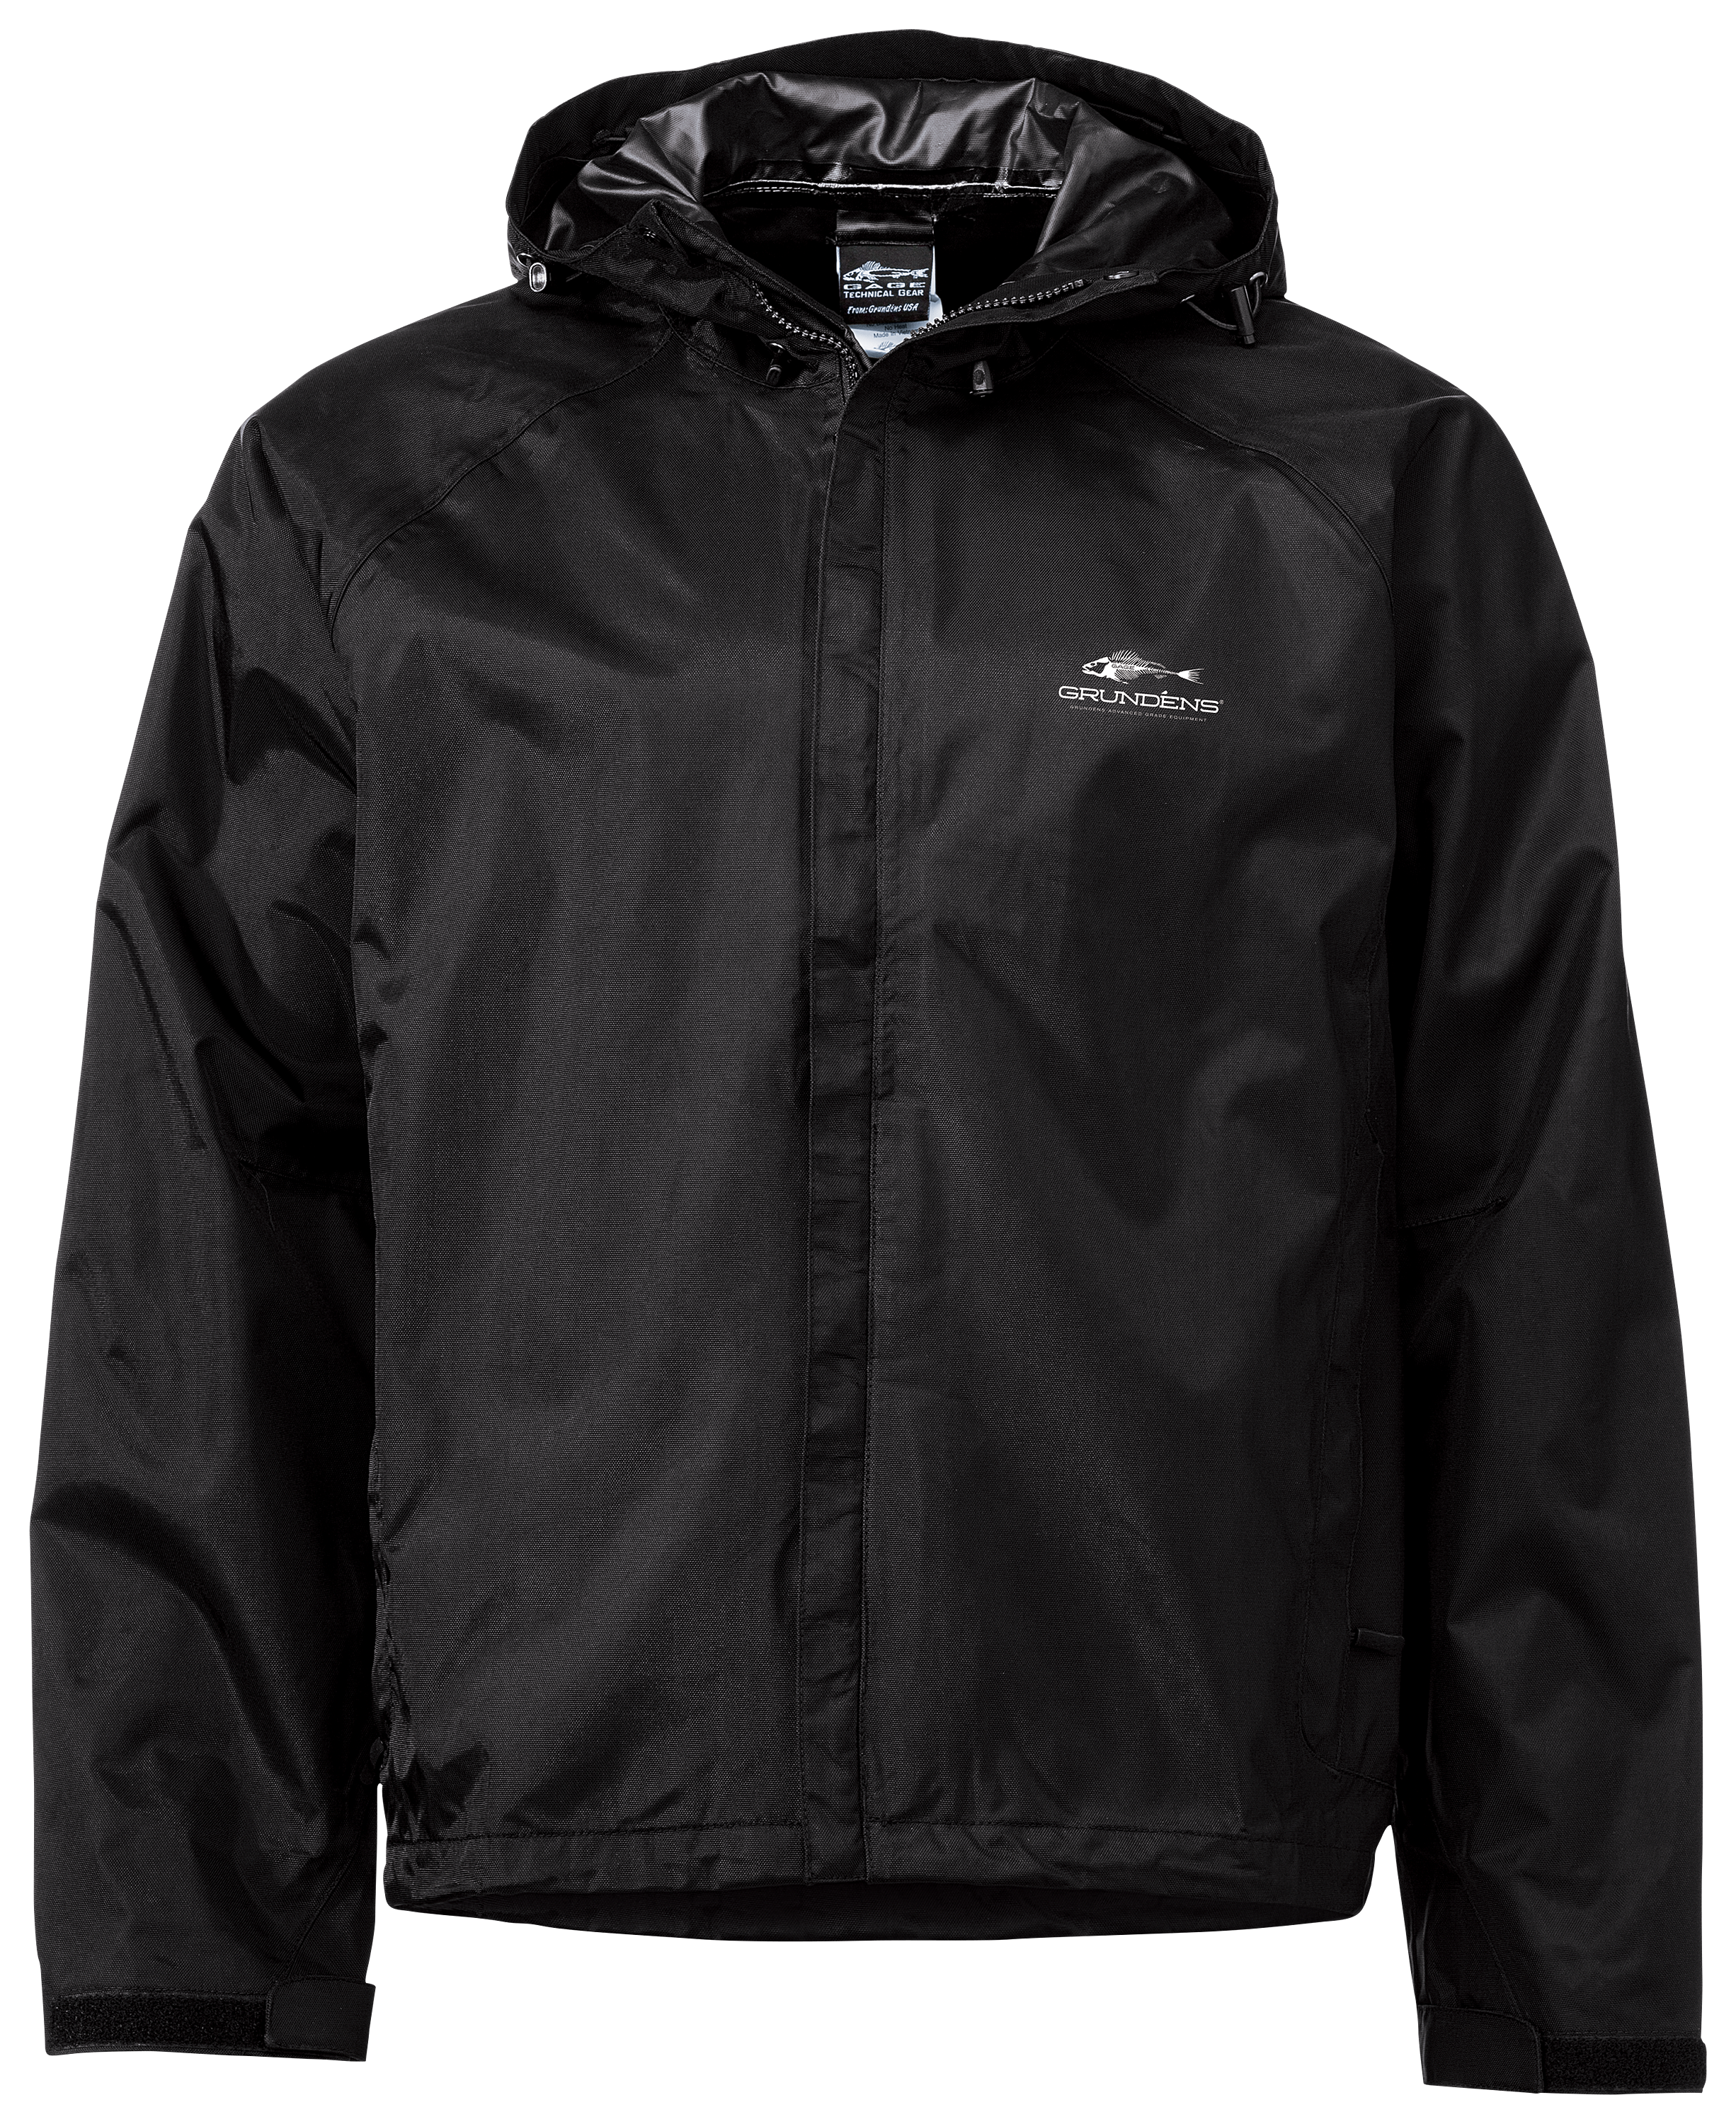 Gage from Grundens Technical Gear Waterproof Fishing Jacket and